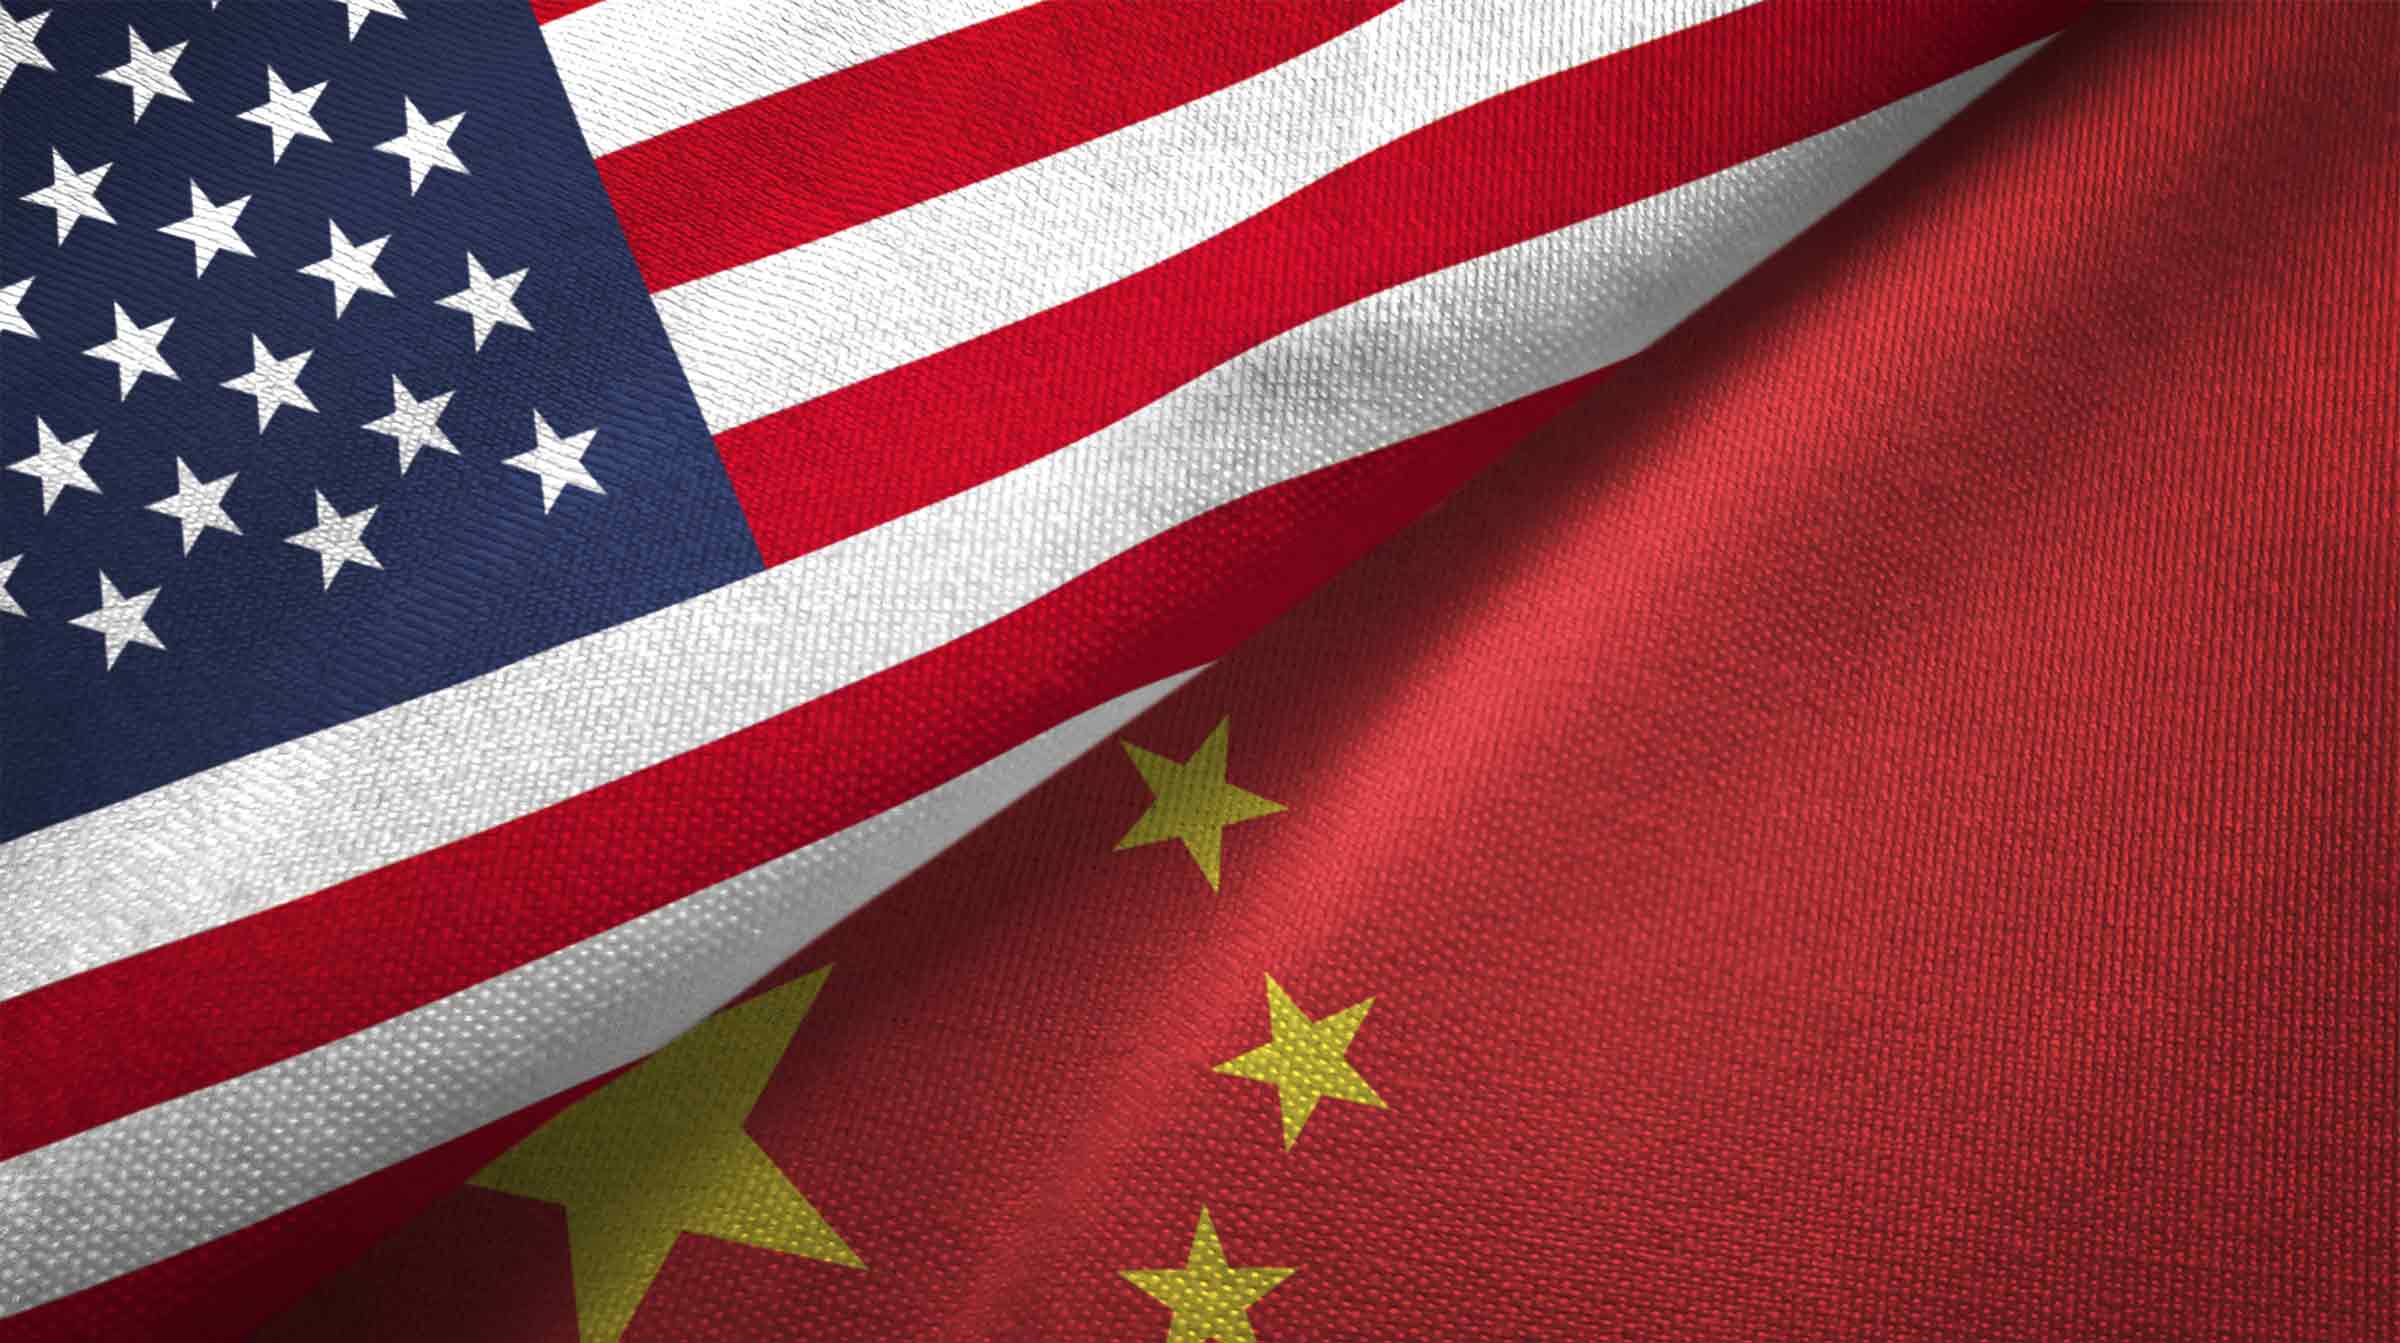 American flag next to Chinese flag